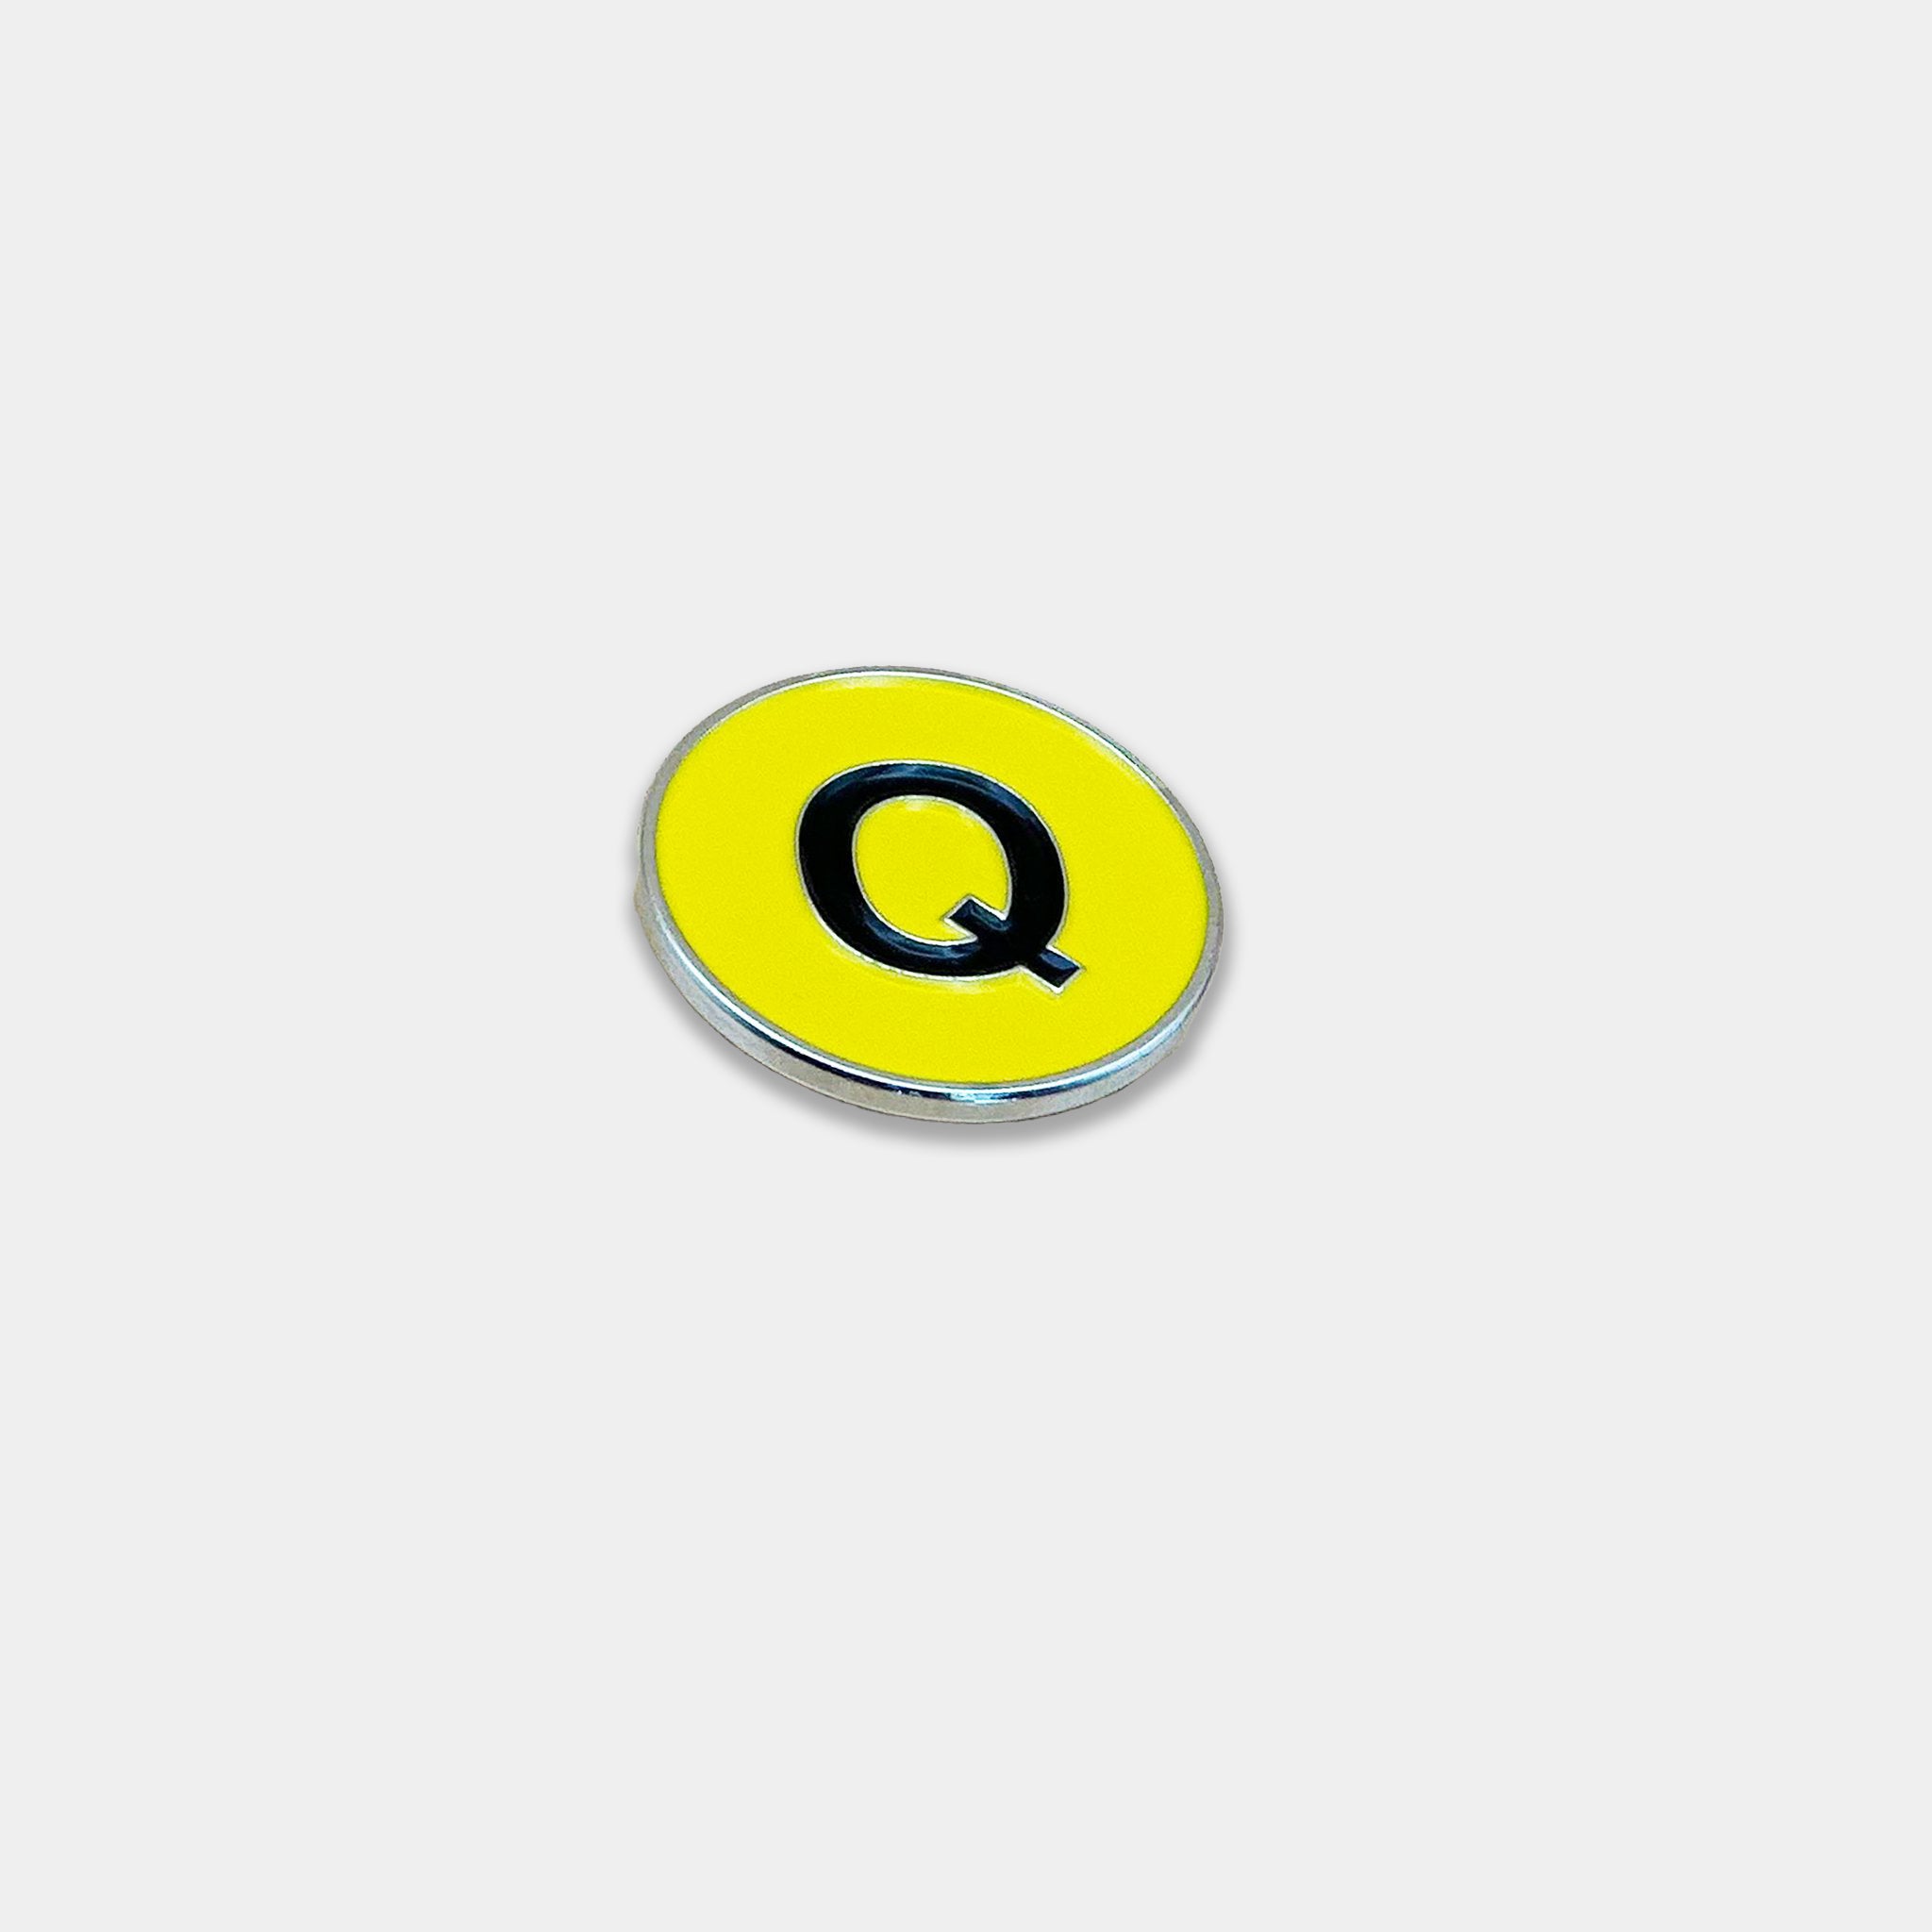 Q Train logo magnetic golf ball marker at a front angle view.